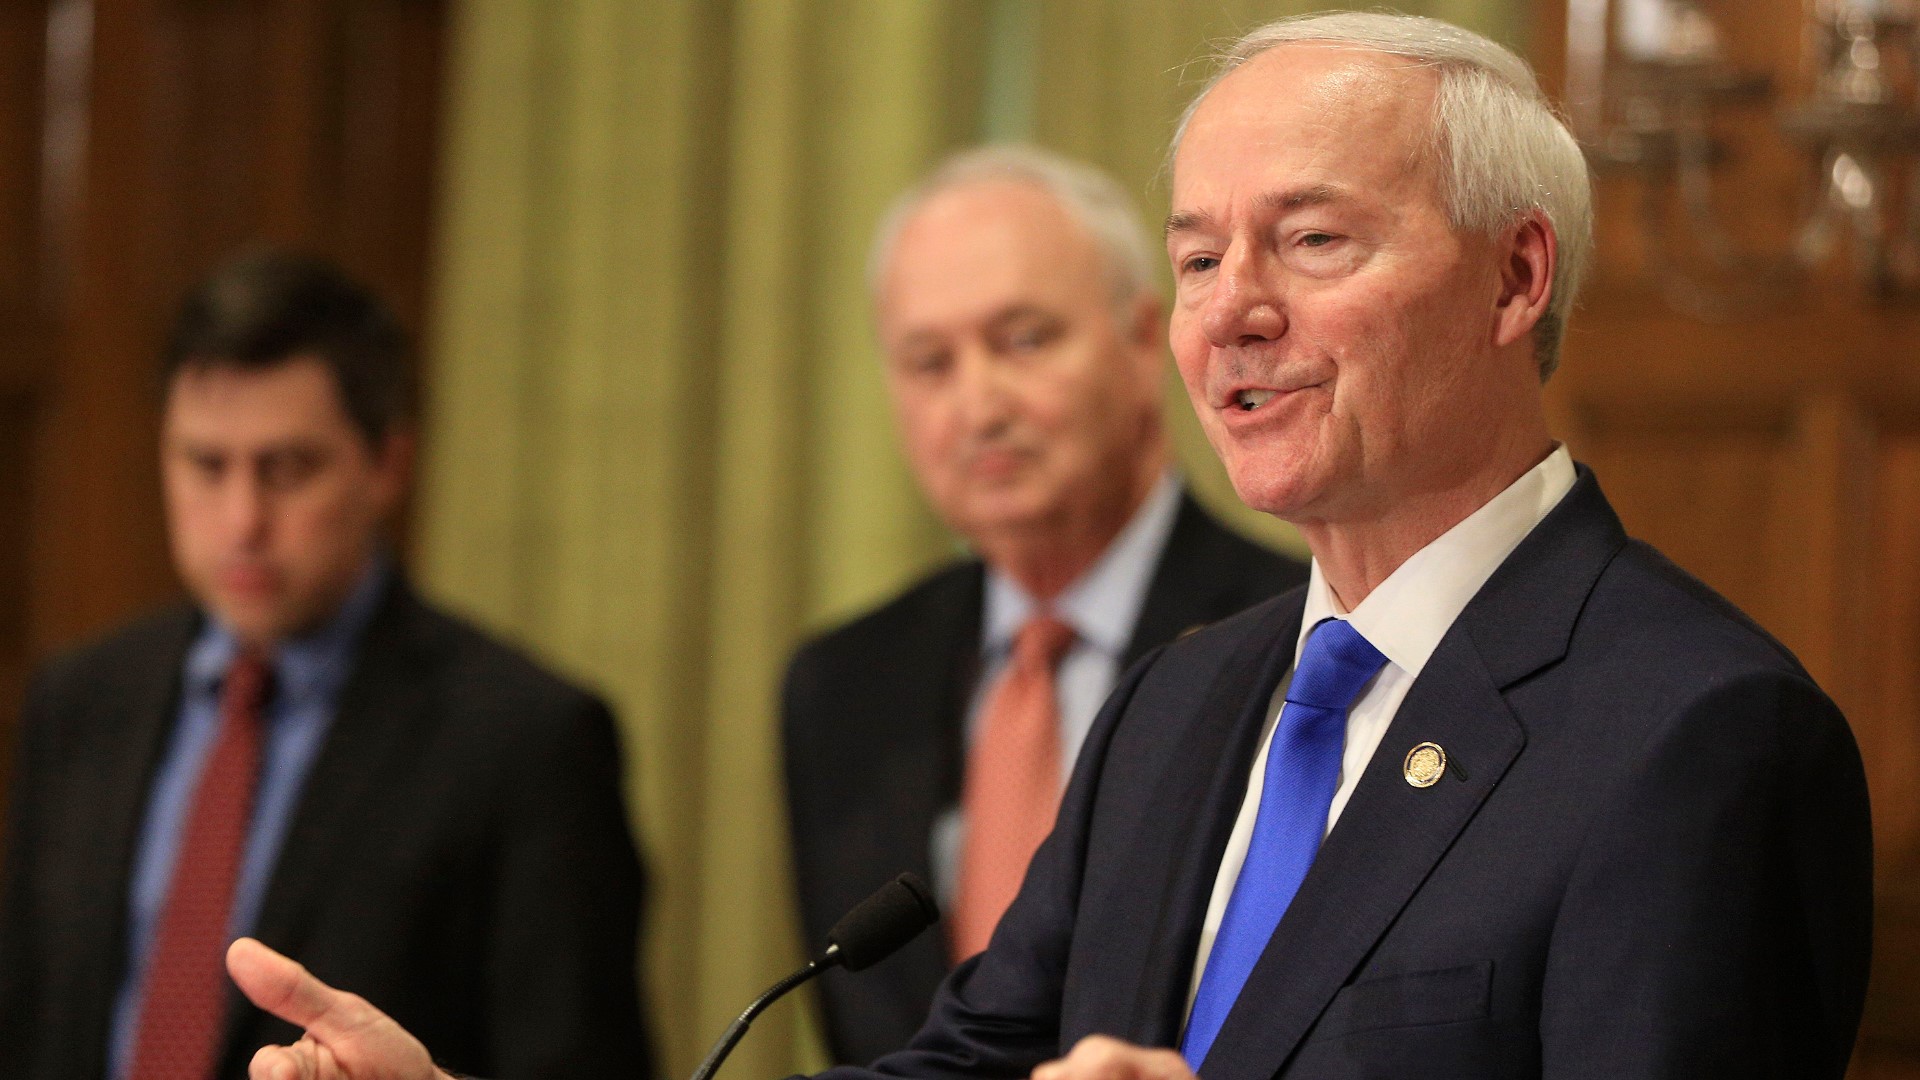 Gov. Hutchinson on Tuesday detailed the proposal calling for a 3.3% increase in spending.